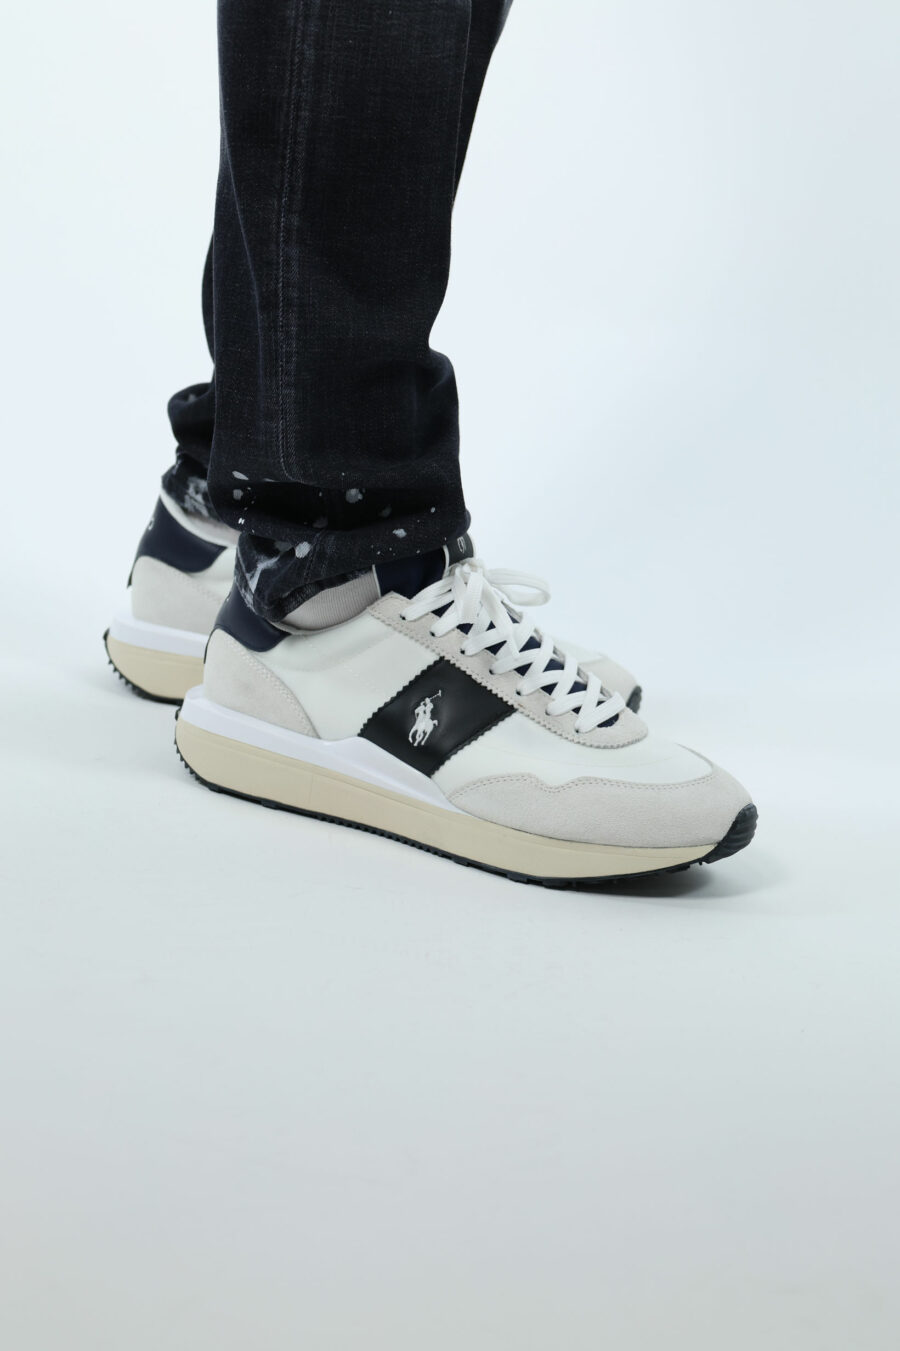 Trainers white and blue detail "train" with white "polo" minilogue - 106756